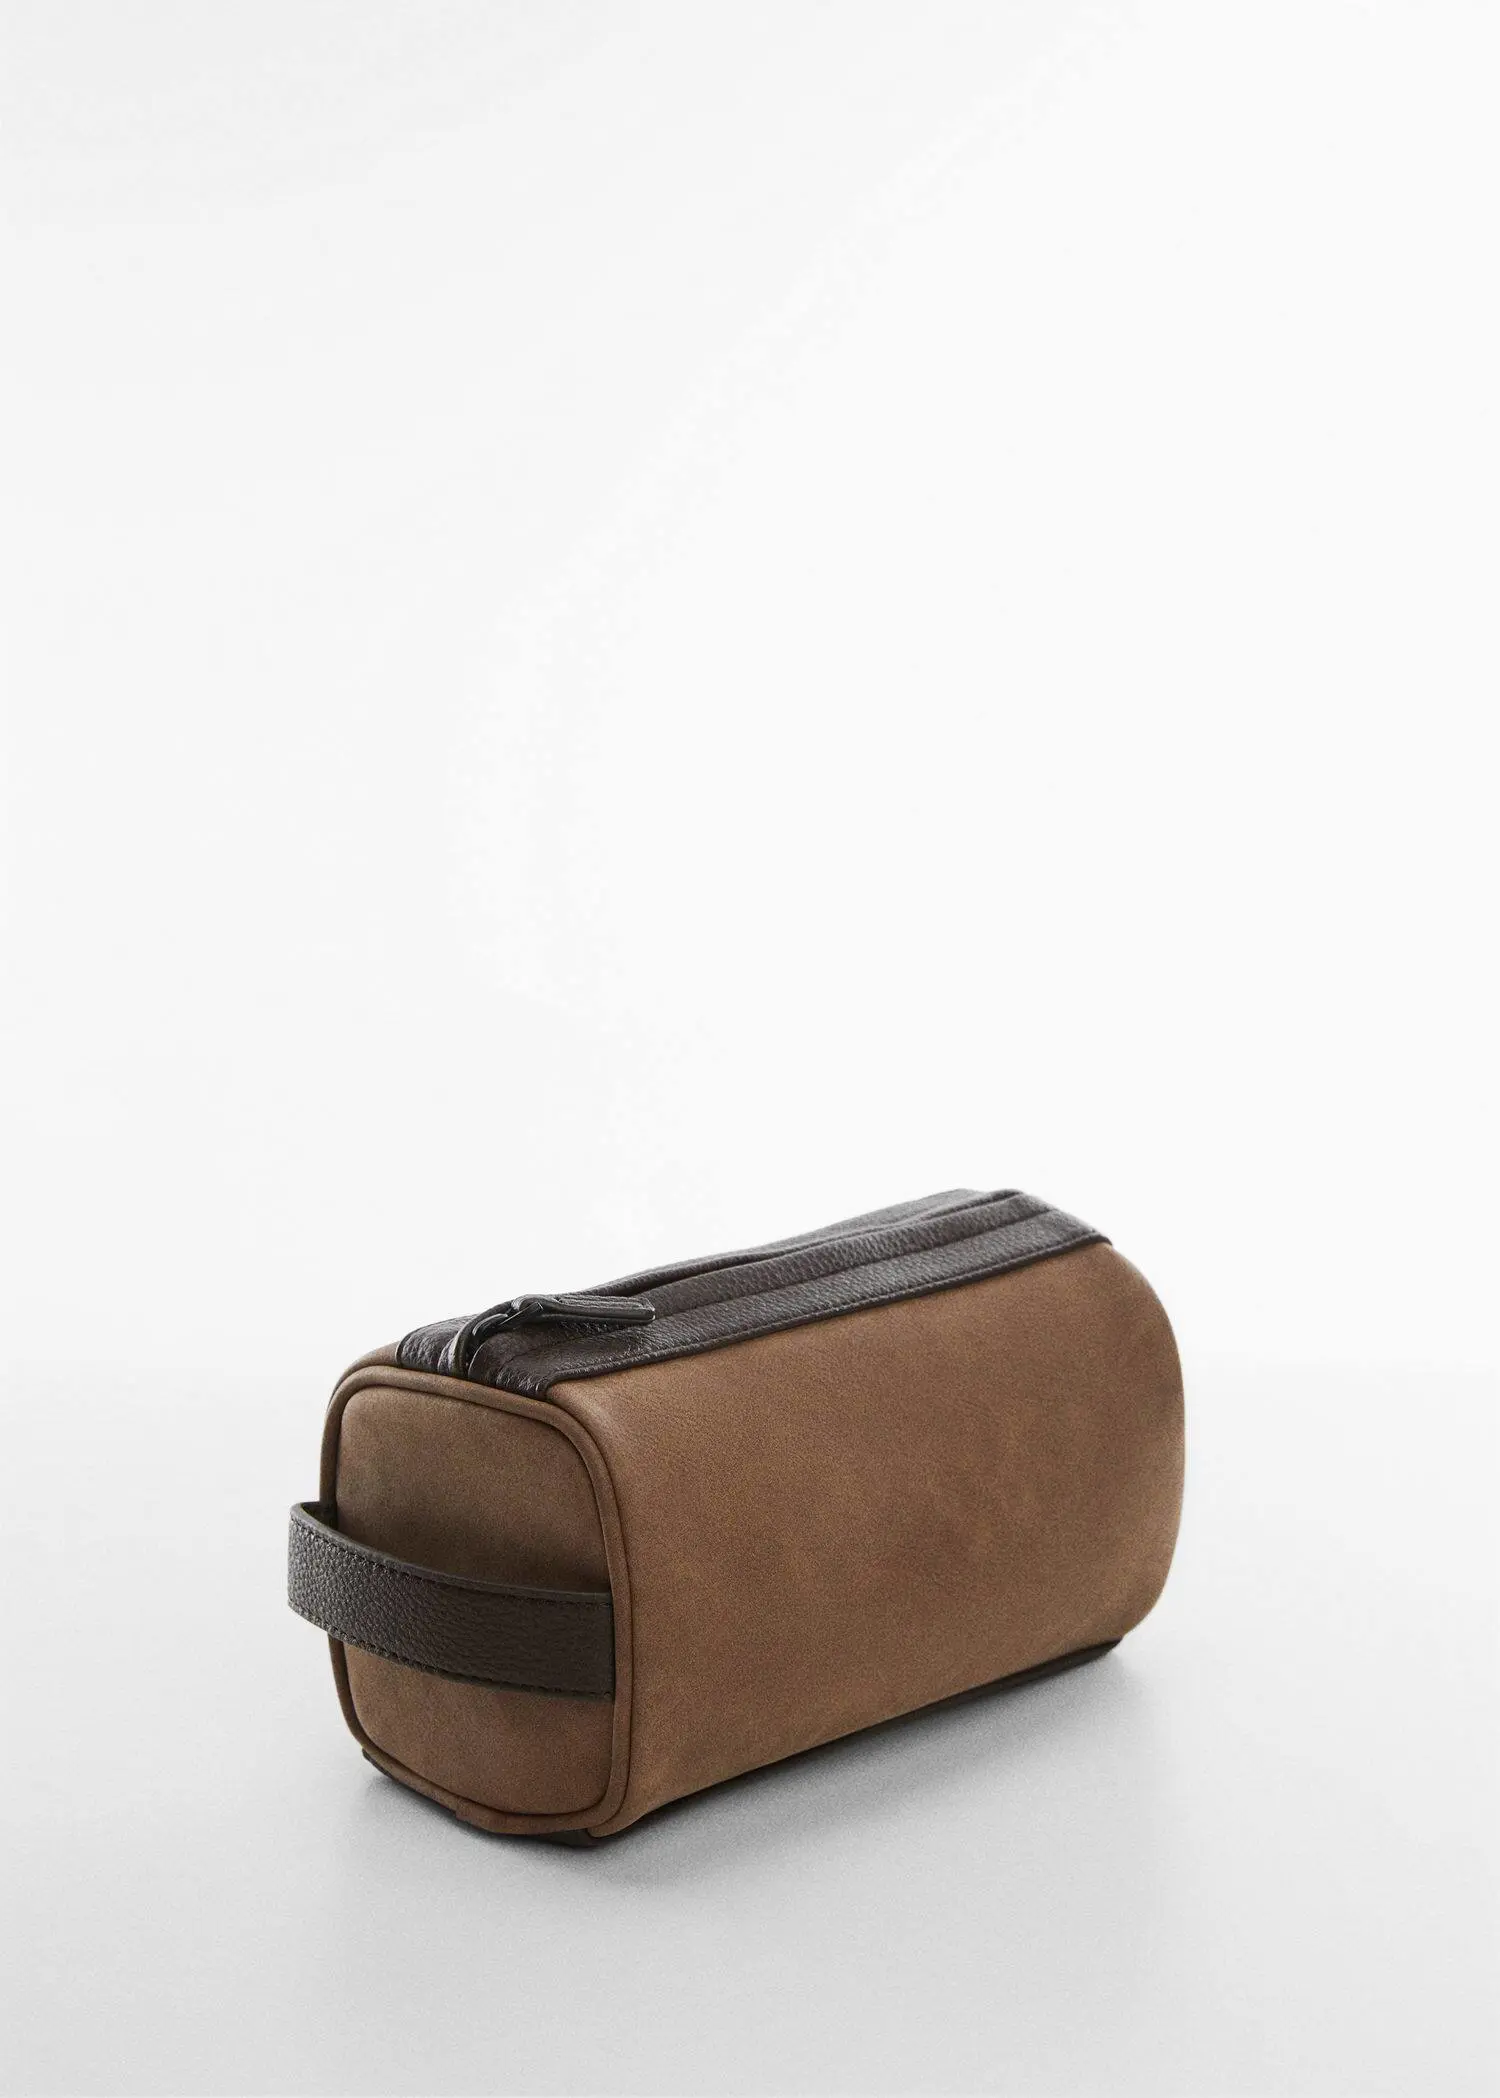 Mango Pebbled leather-effect toiletry bag. 1